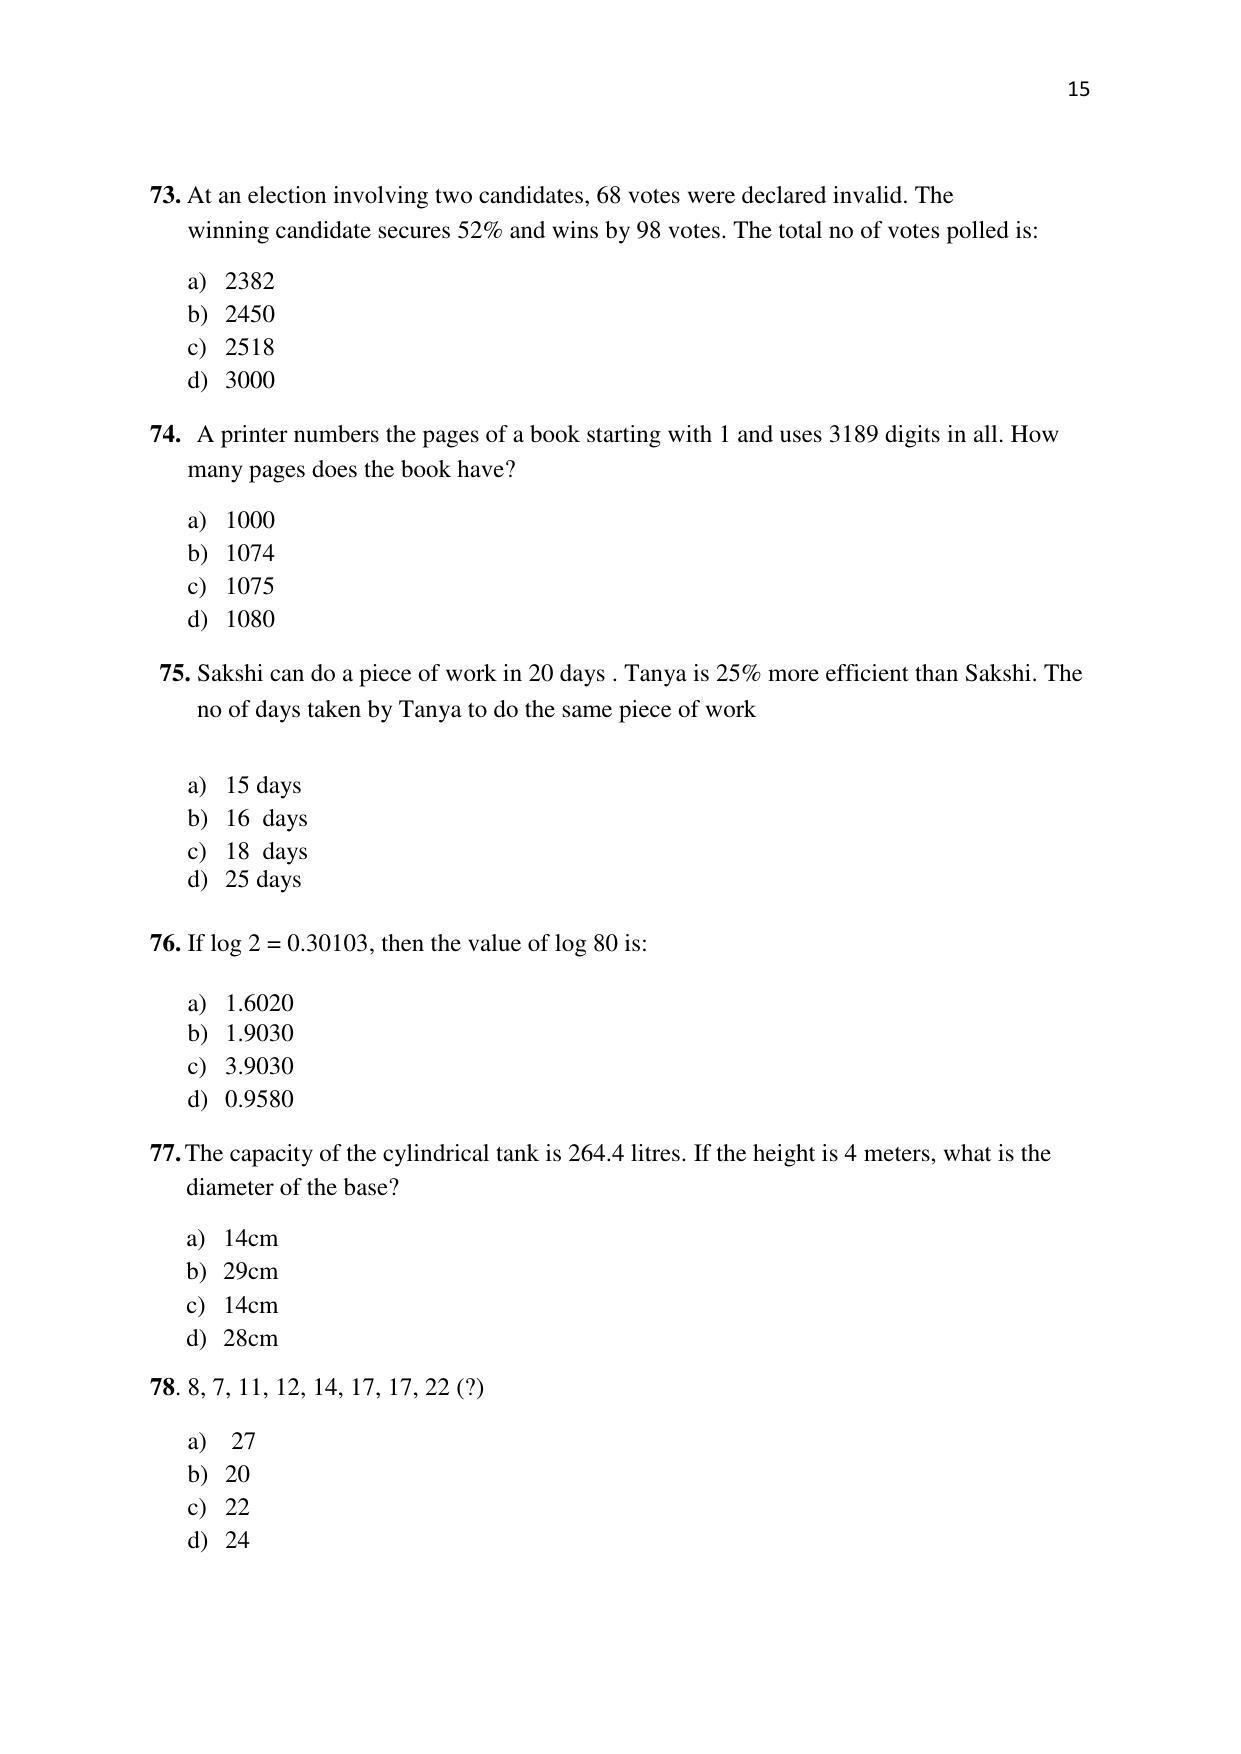 KMAT Question Papers - November 2016 - Page 15